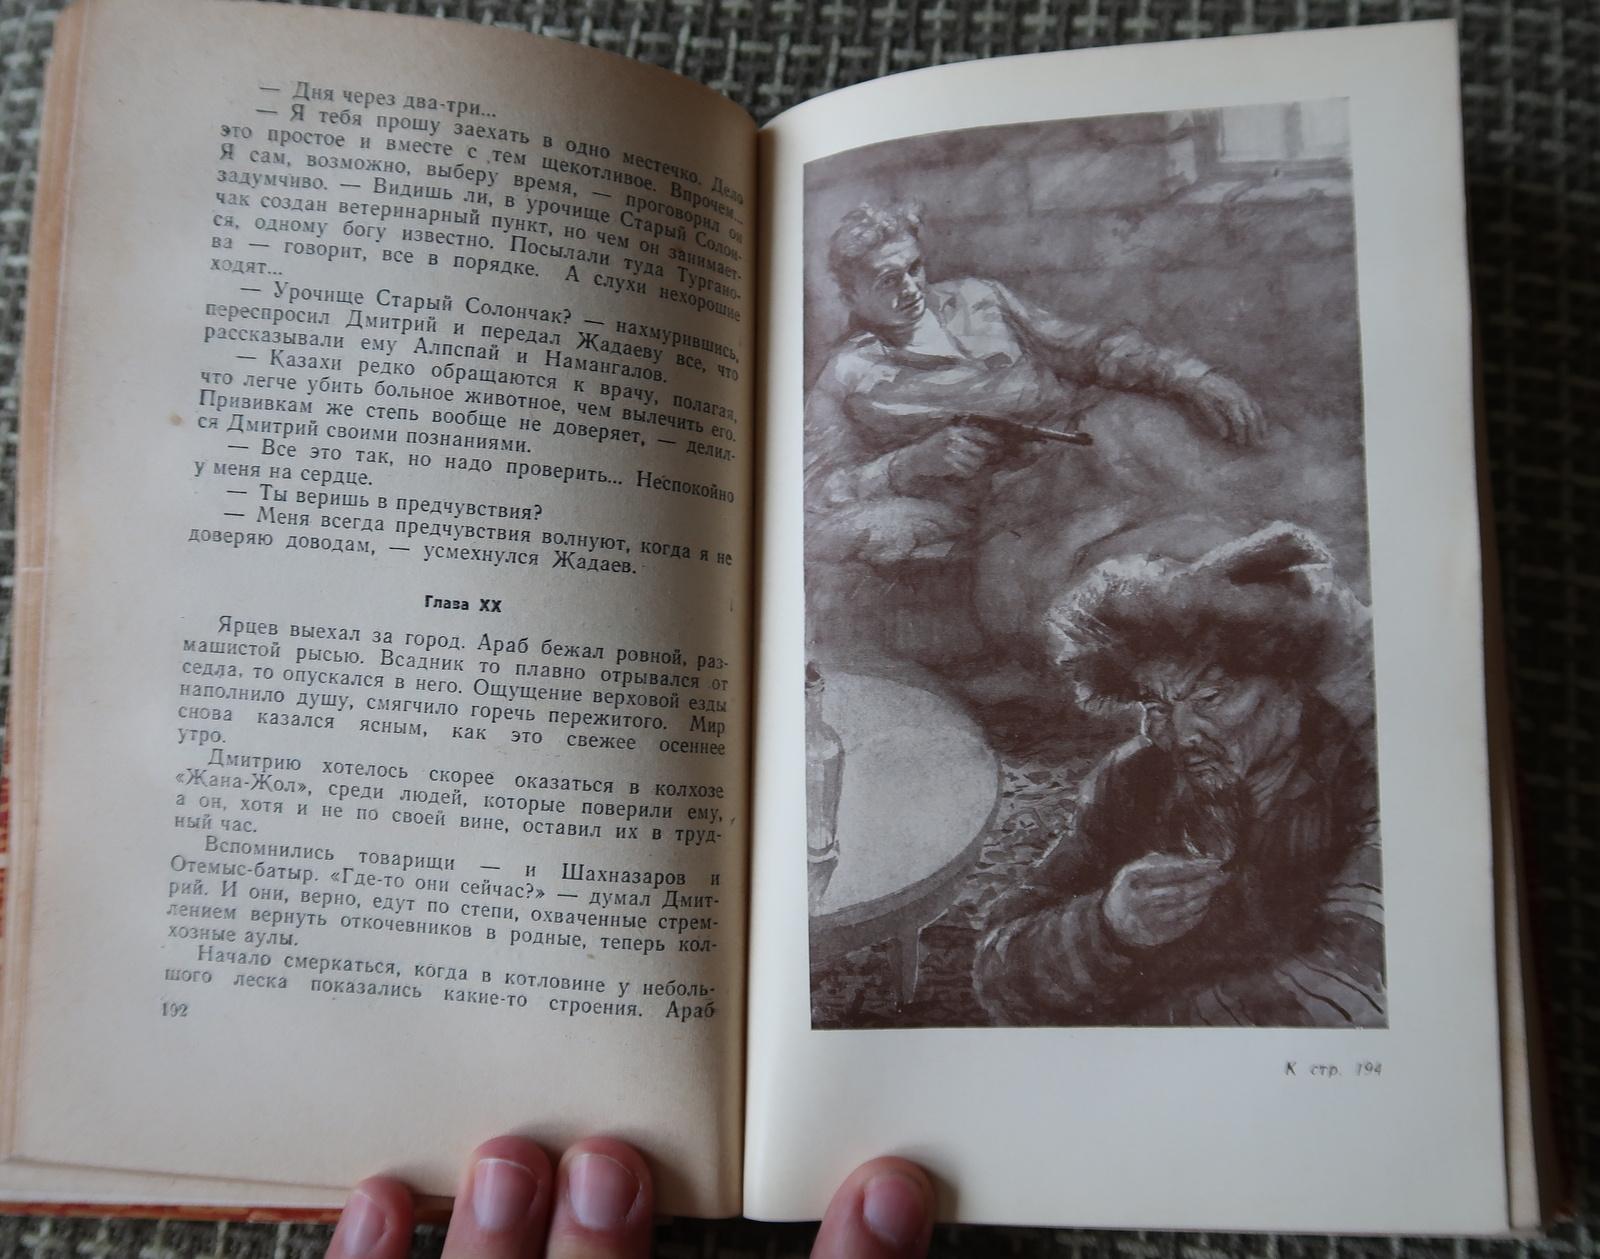 Vintage USSR Book: 'Nomads' by K. Kripichny - A Rare Gem from 1963, 1J126 3